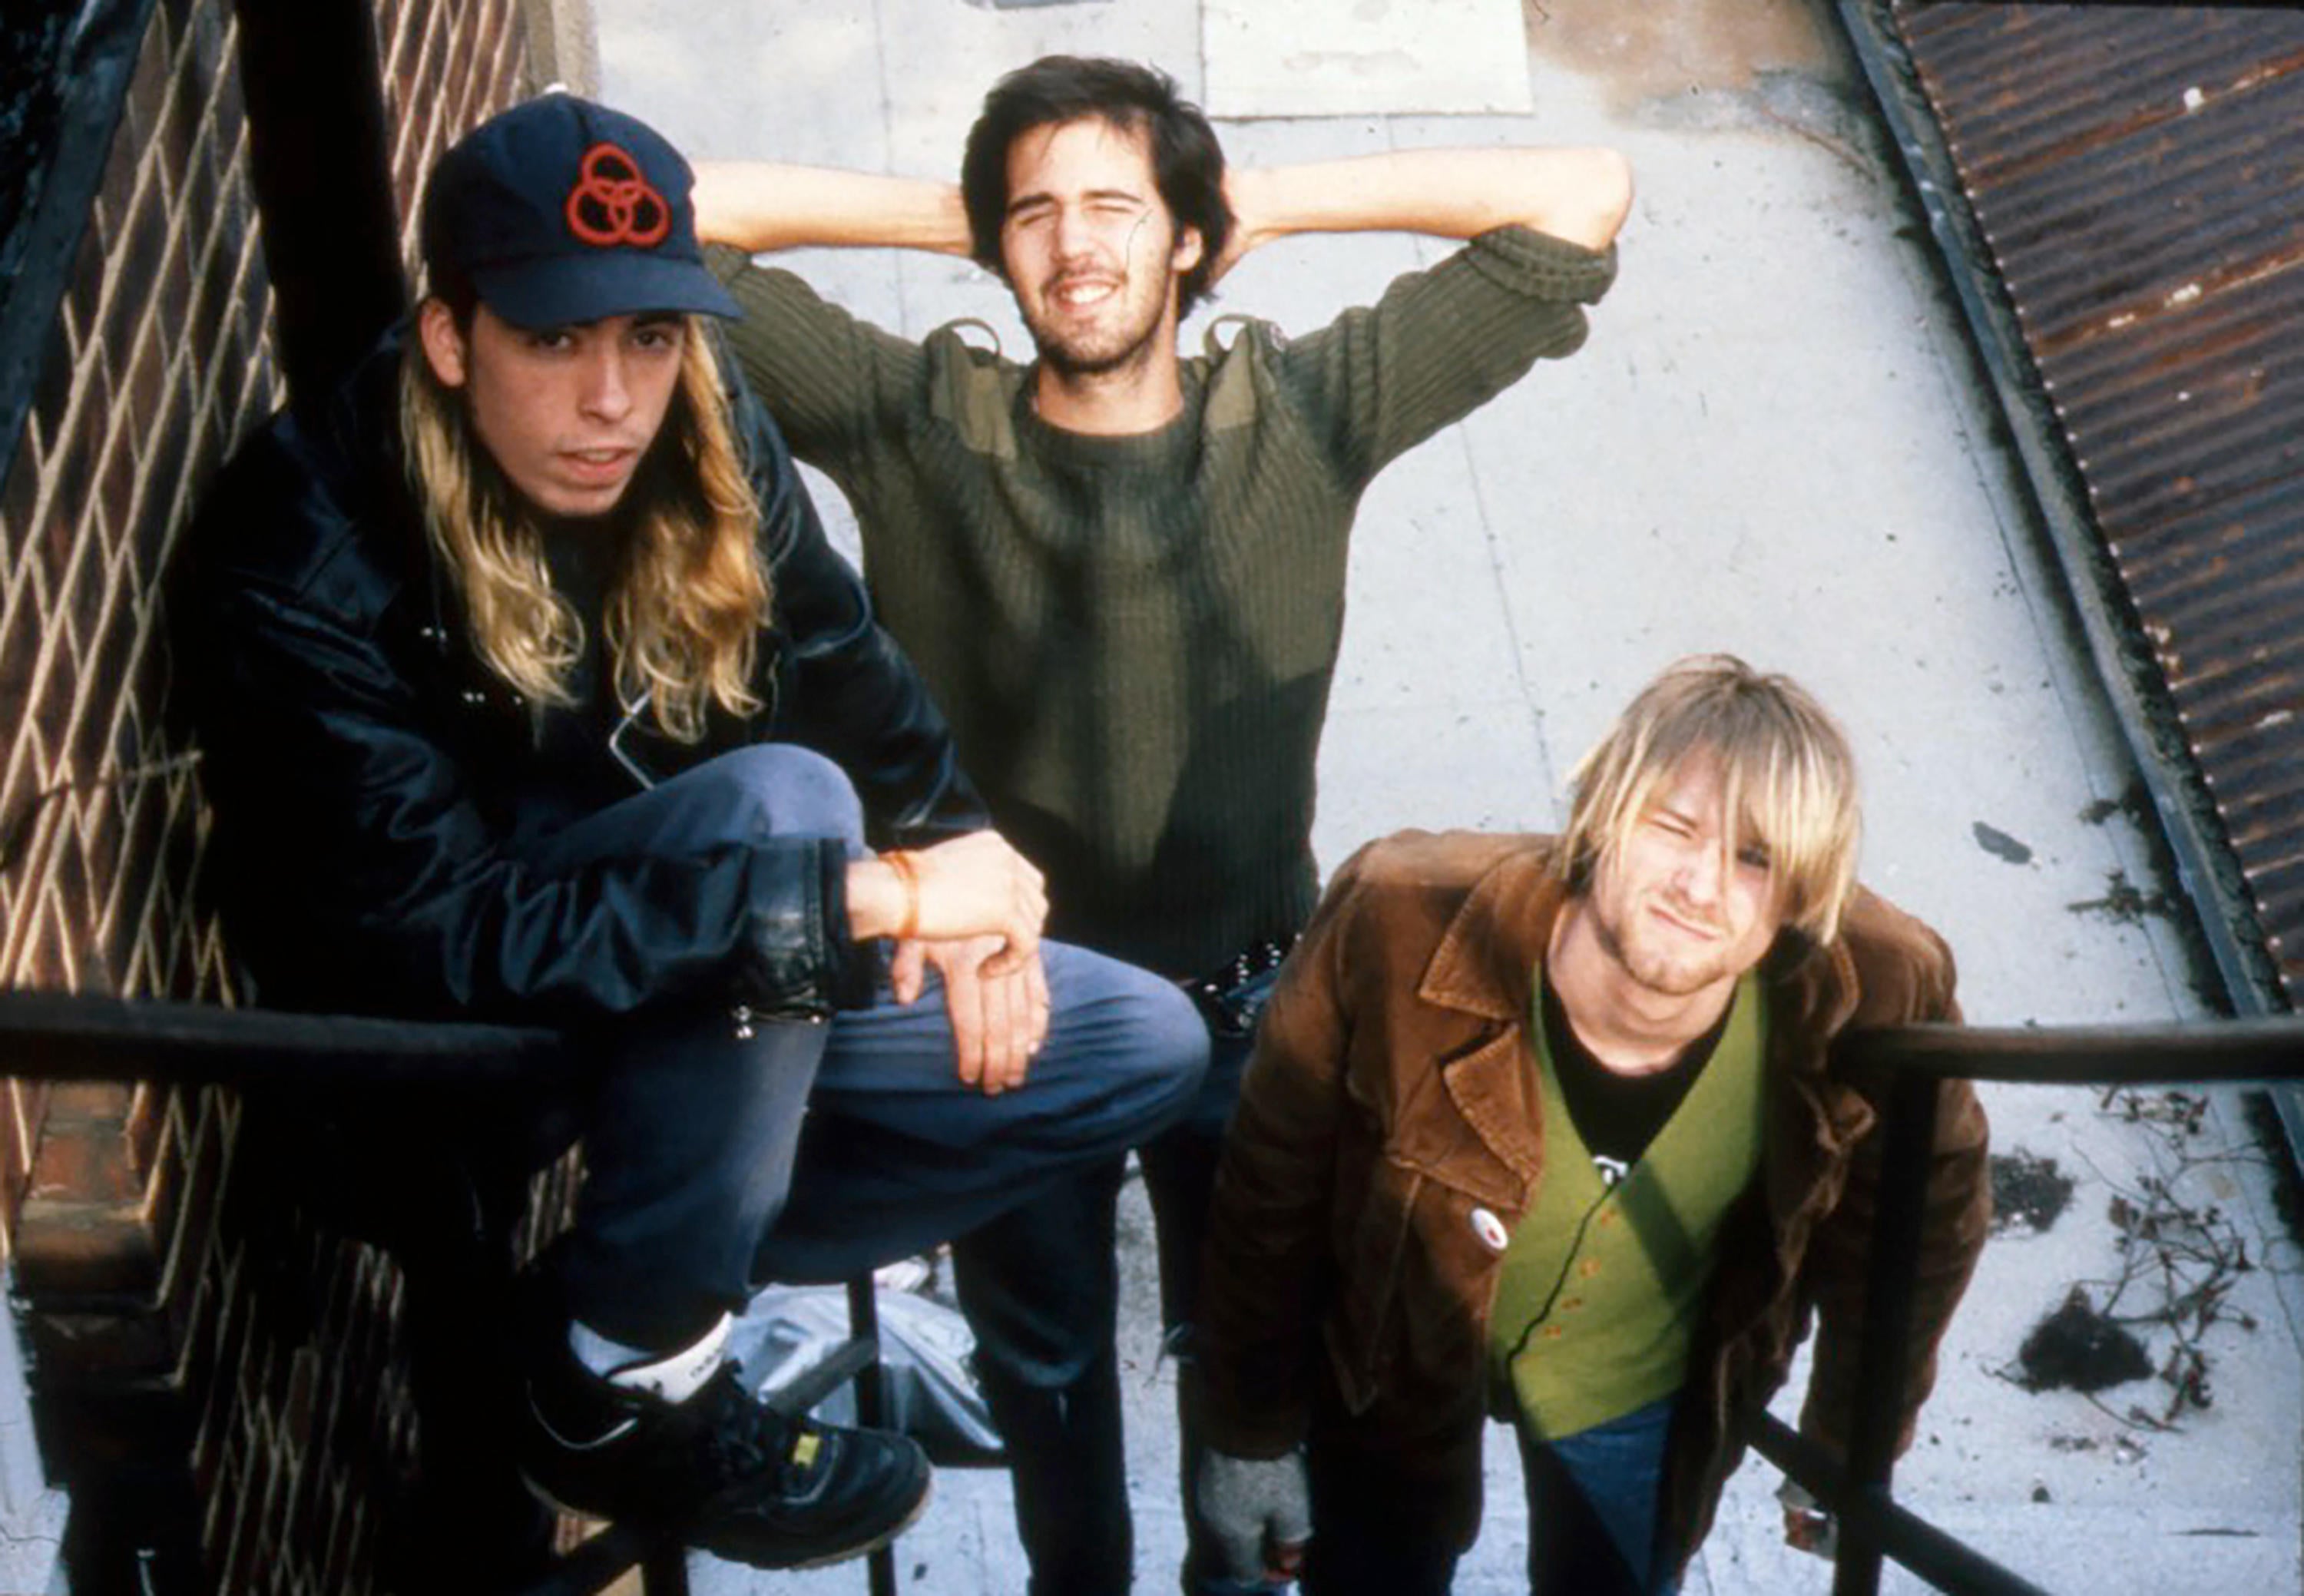 inside nirvana’s last ever show: kurt cobain, power outages and a prophetic declaration about the band’s end